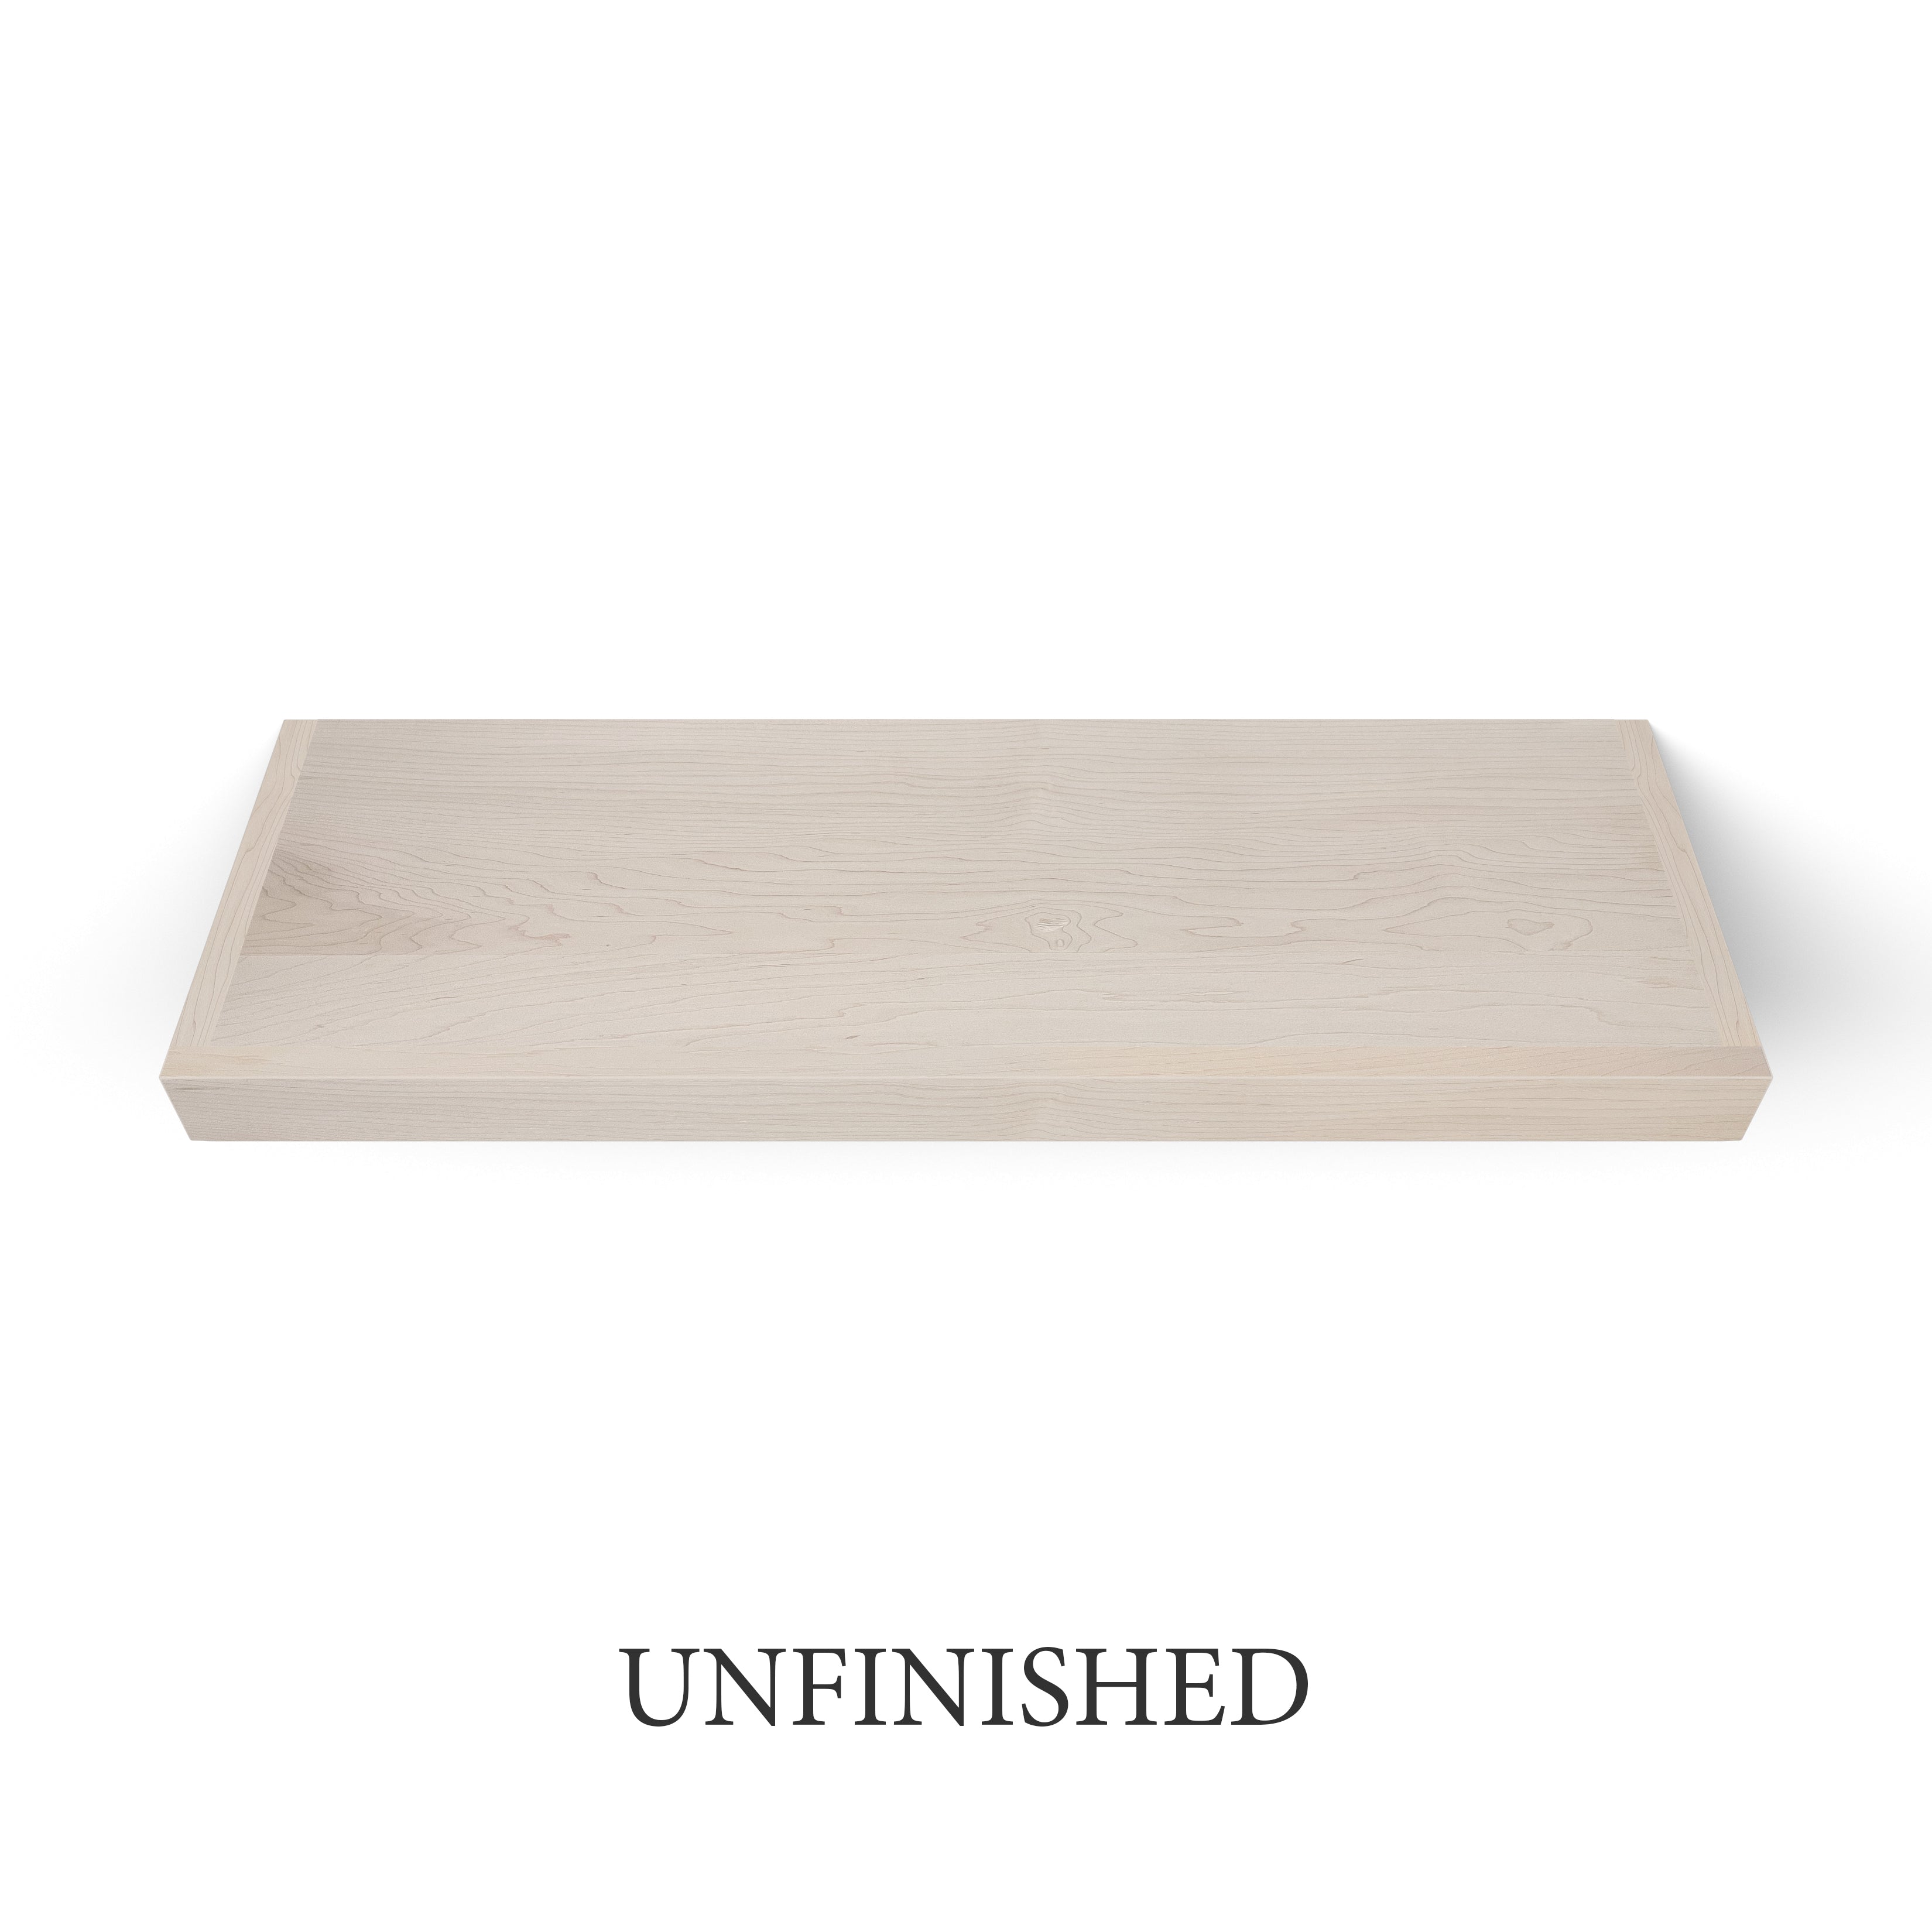 unfinished Maple 2 inch Thick Floating Shelf